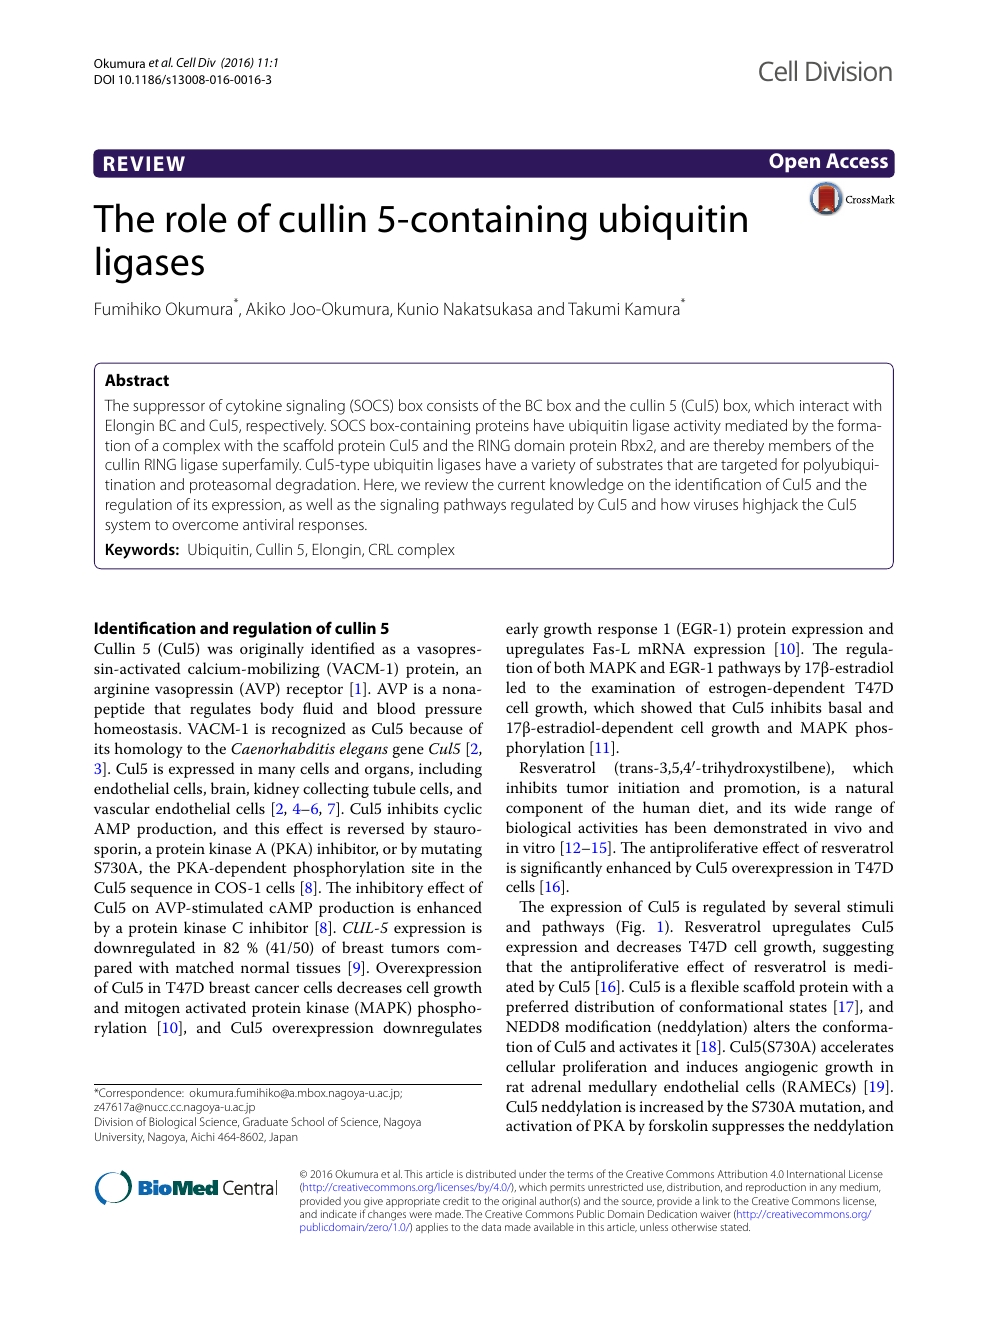 The role of cullin 5-containing ubiquitin ligases – topic of 